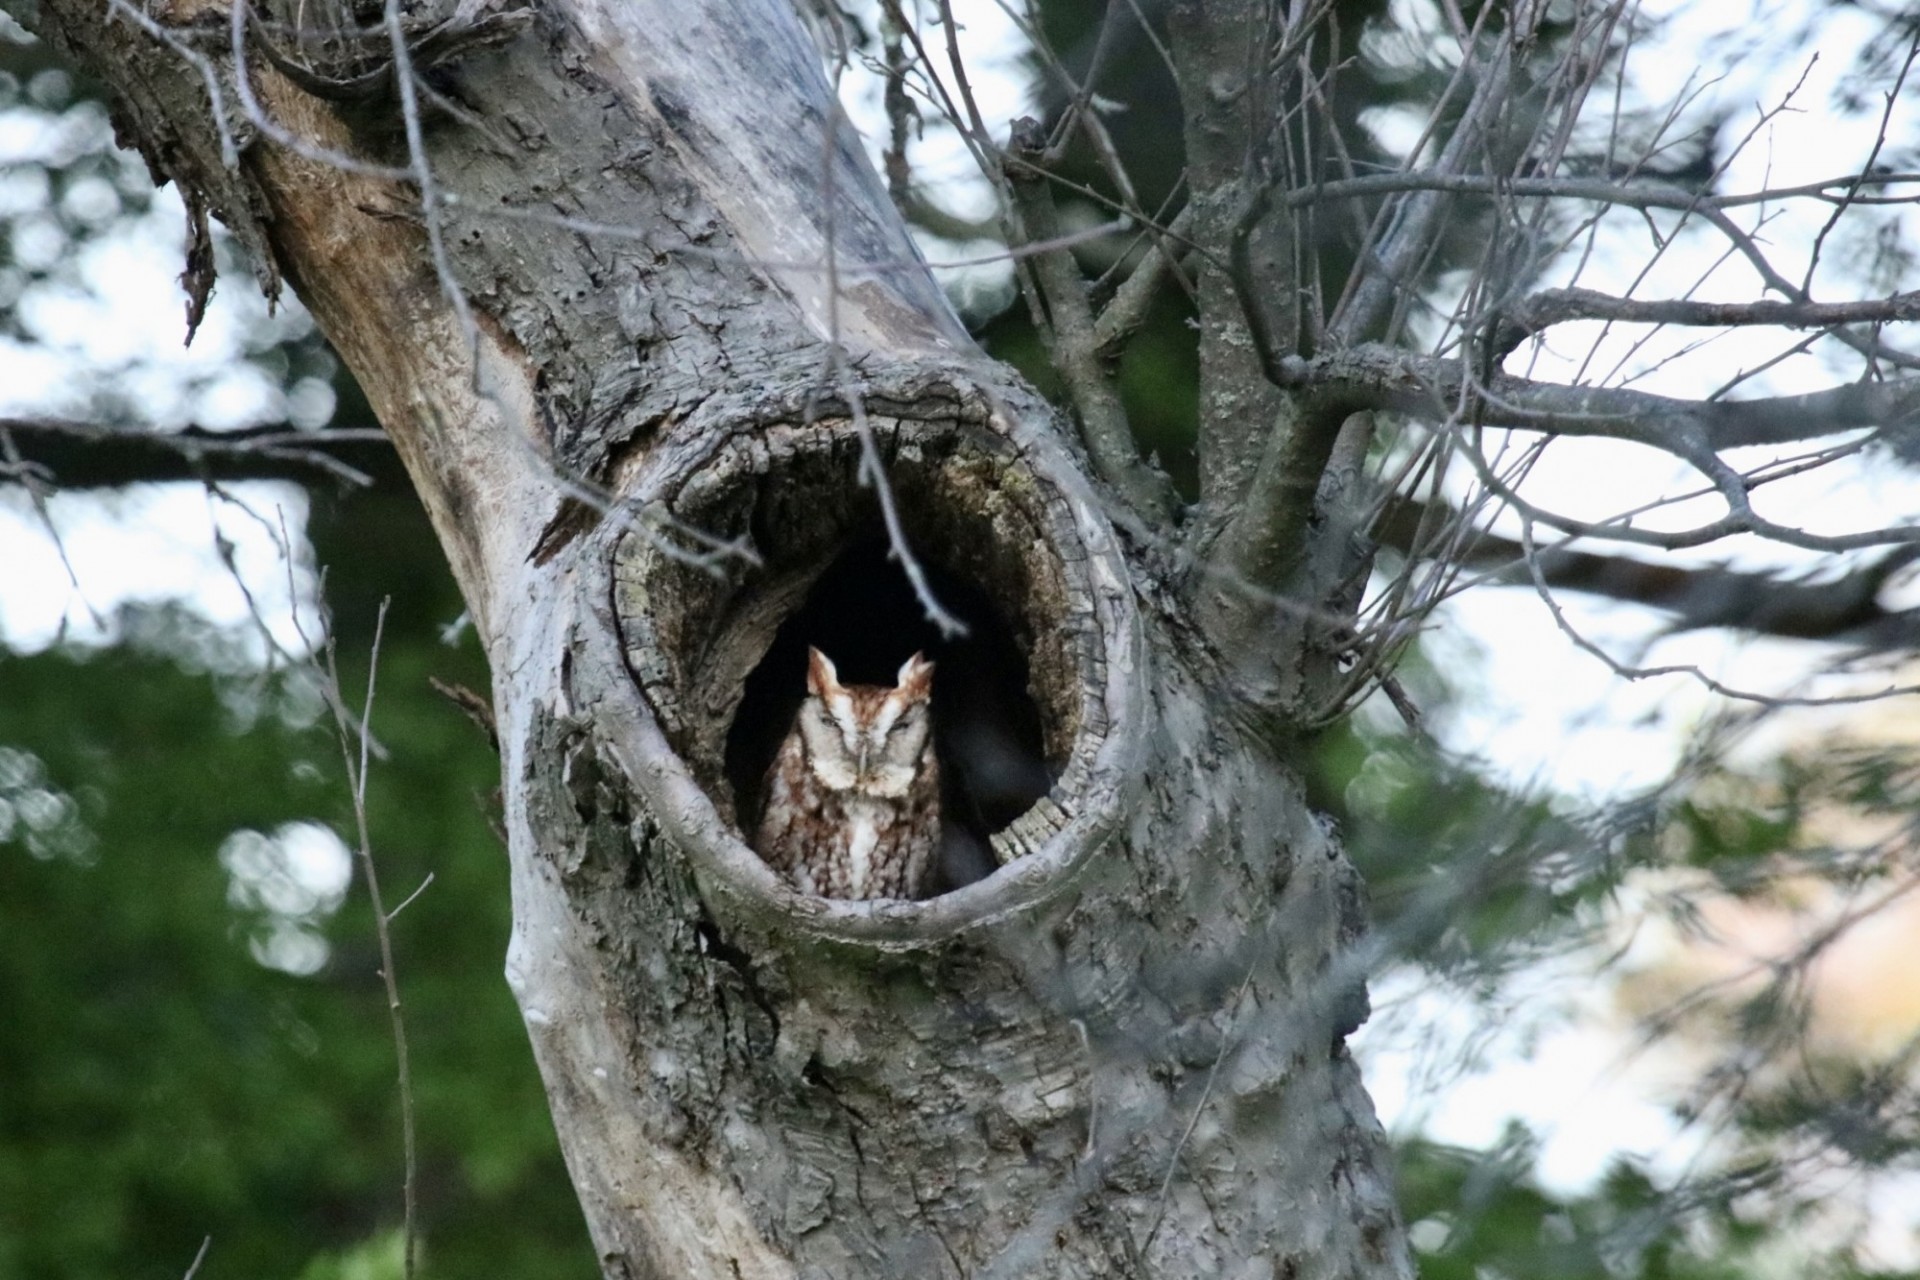 Eastern screech owl in an apple tree on Lamont-Doherty Earth Observatory campus. Credit: Timothy Trimble, Lamont-Doherty Earth Observatory